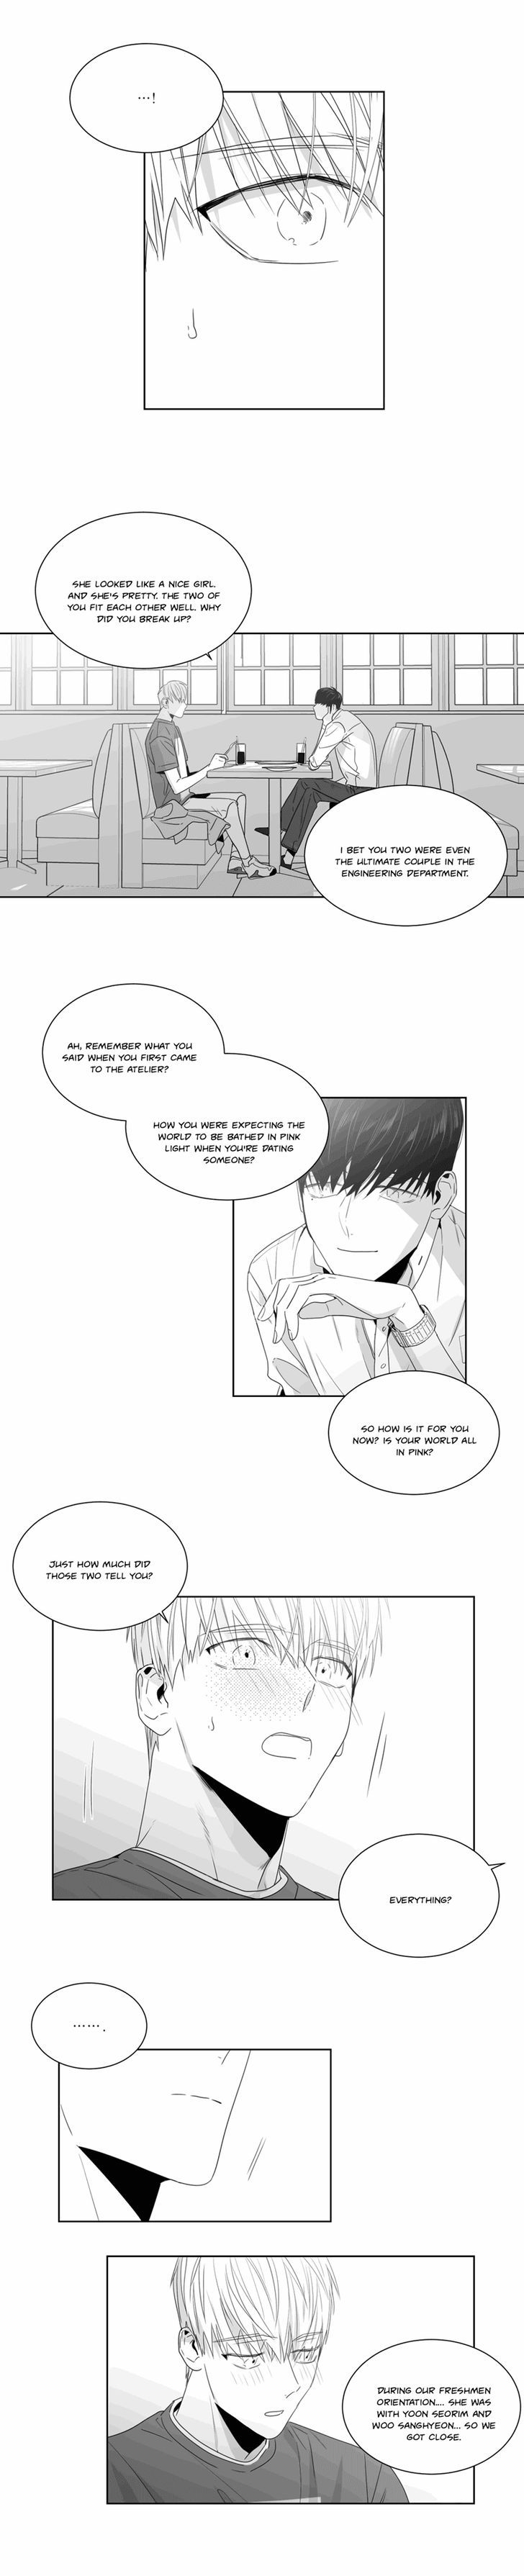 Lover Boy (Lezhin) Chapter 038 page 12